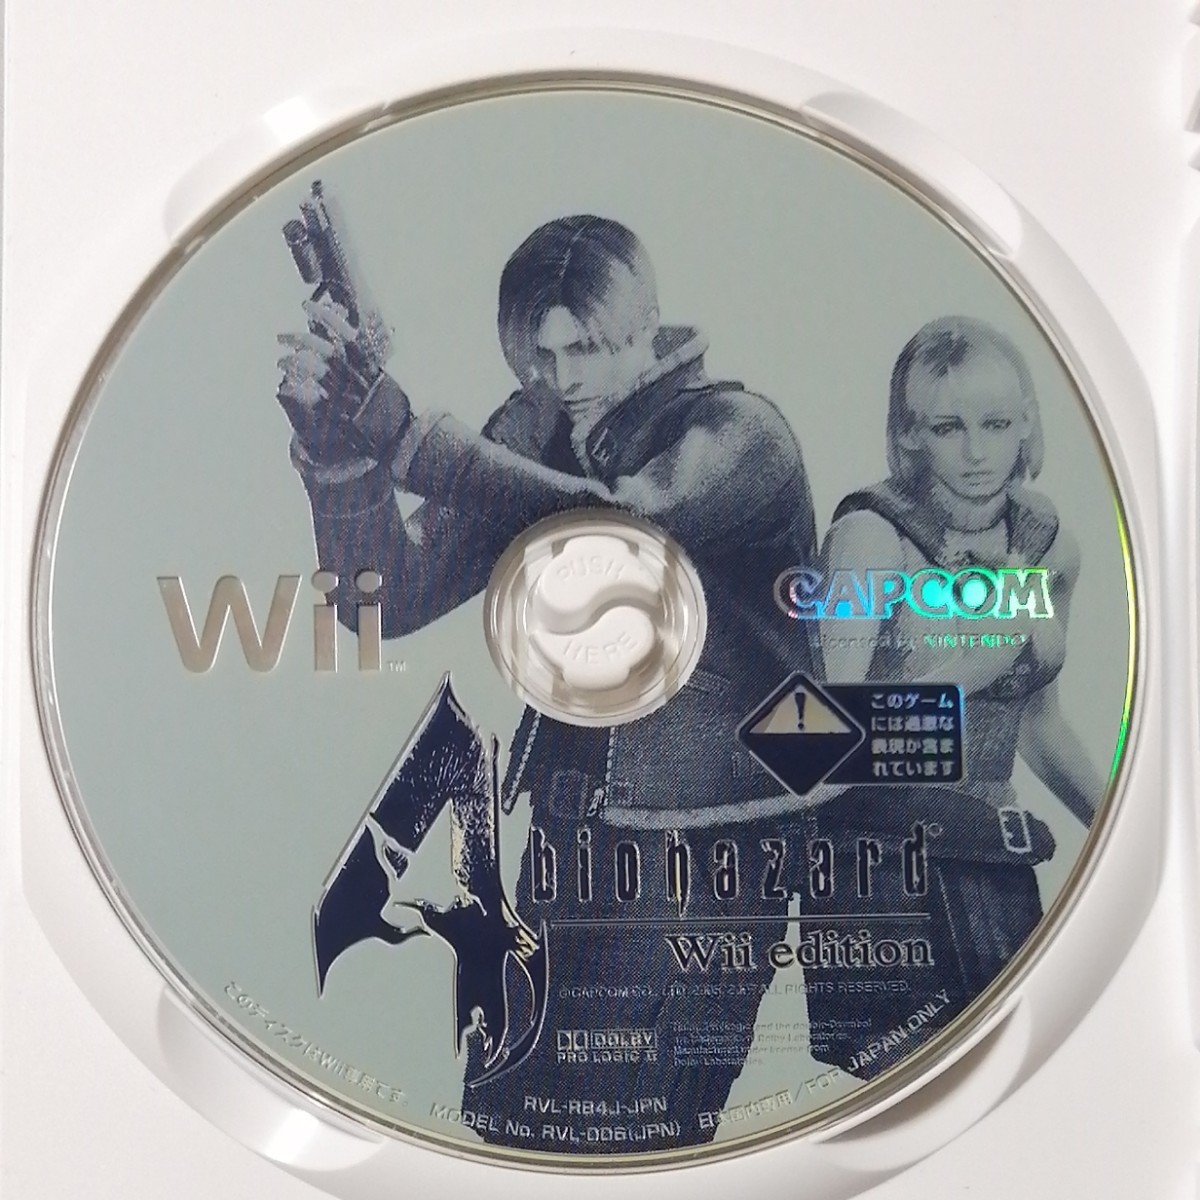 【Wii】 バイオハザード4 Wii edition 